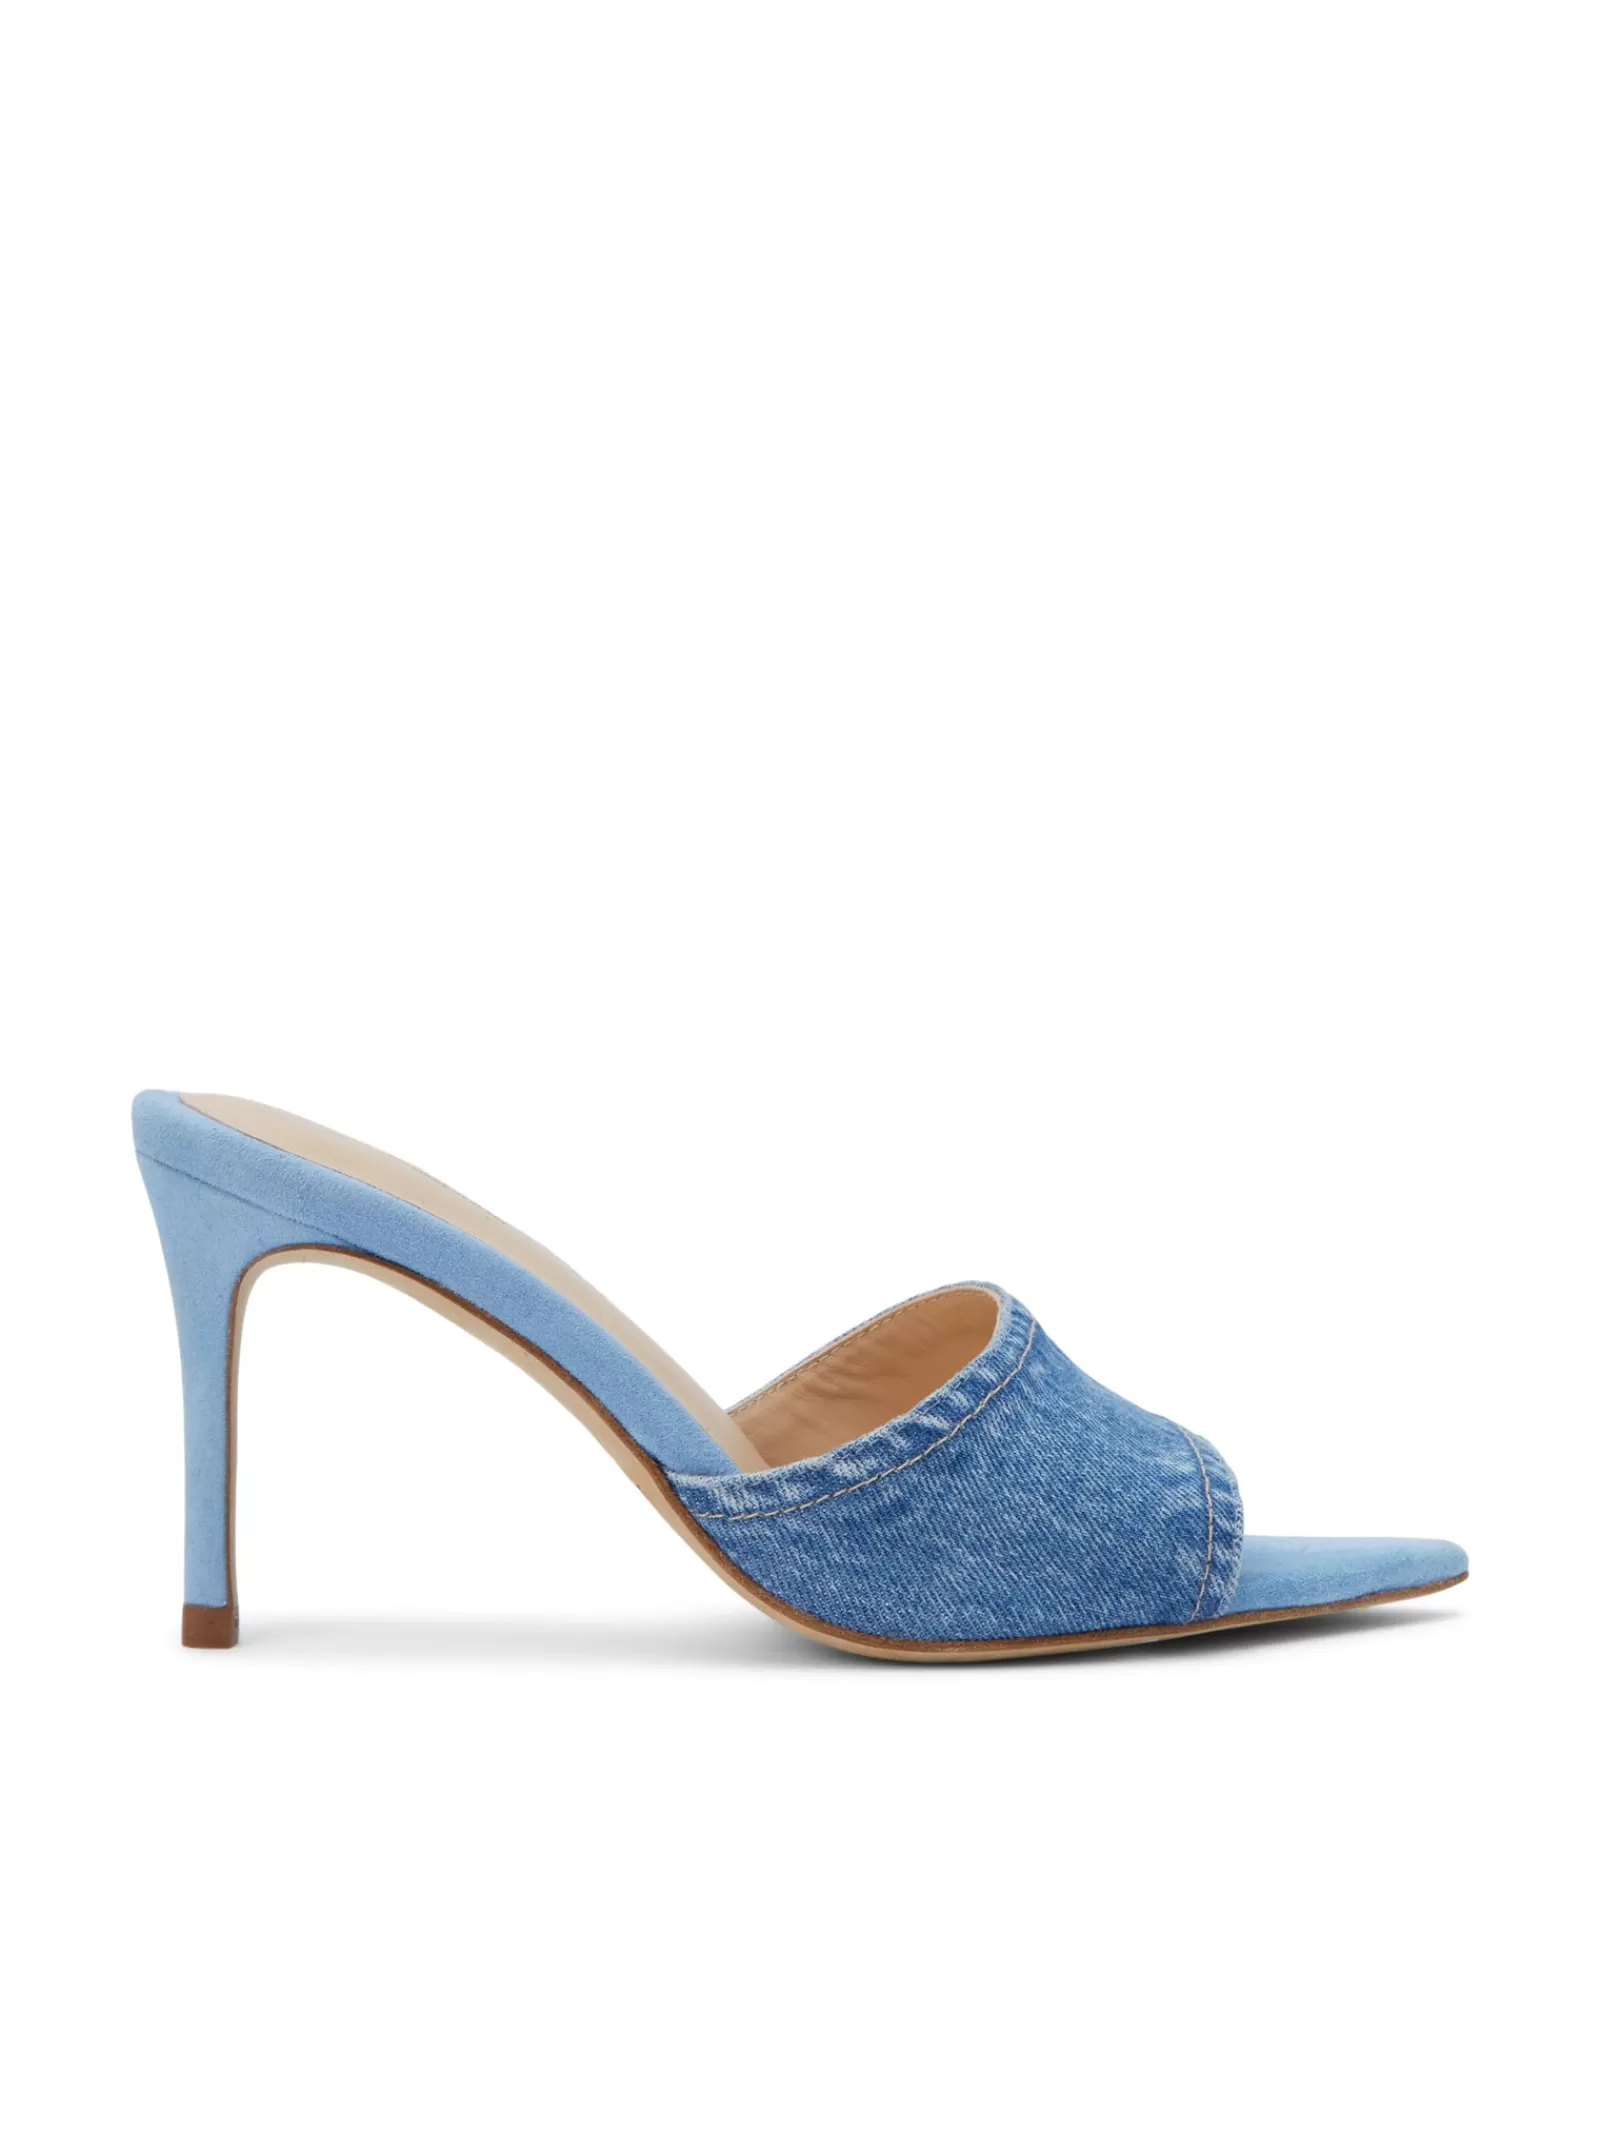 L'AGENCE Lolita Open Toe Mule< Back in Stock | Resort Collection